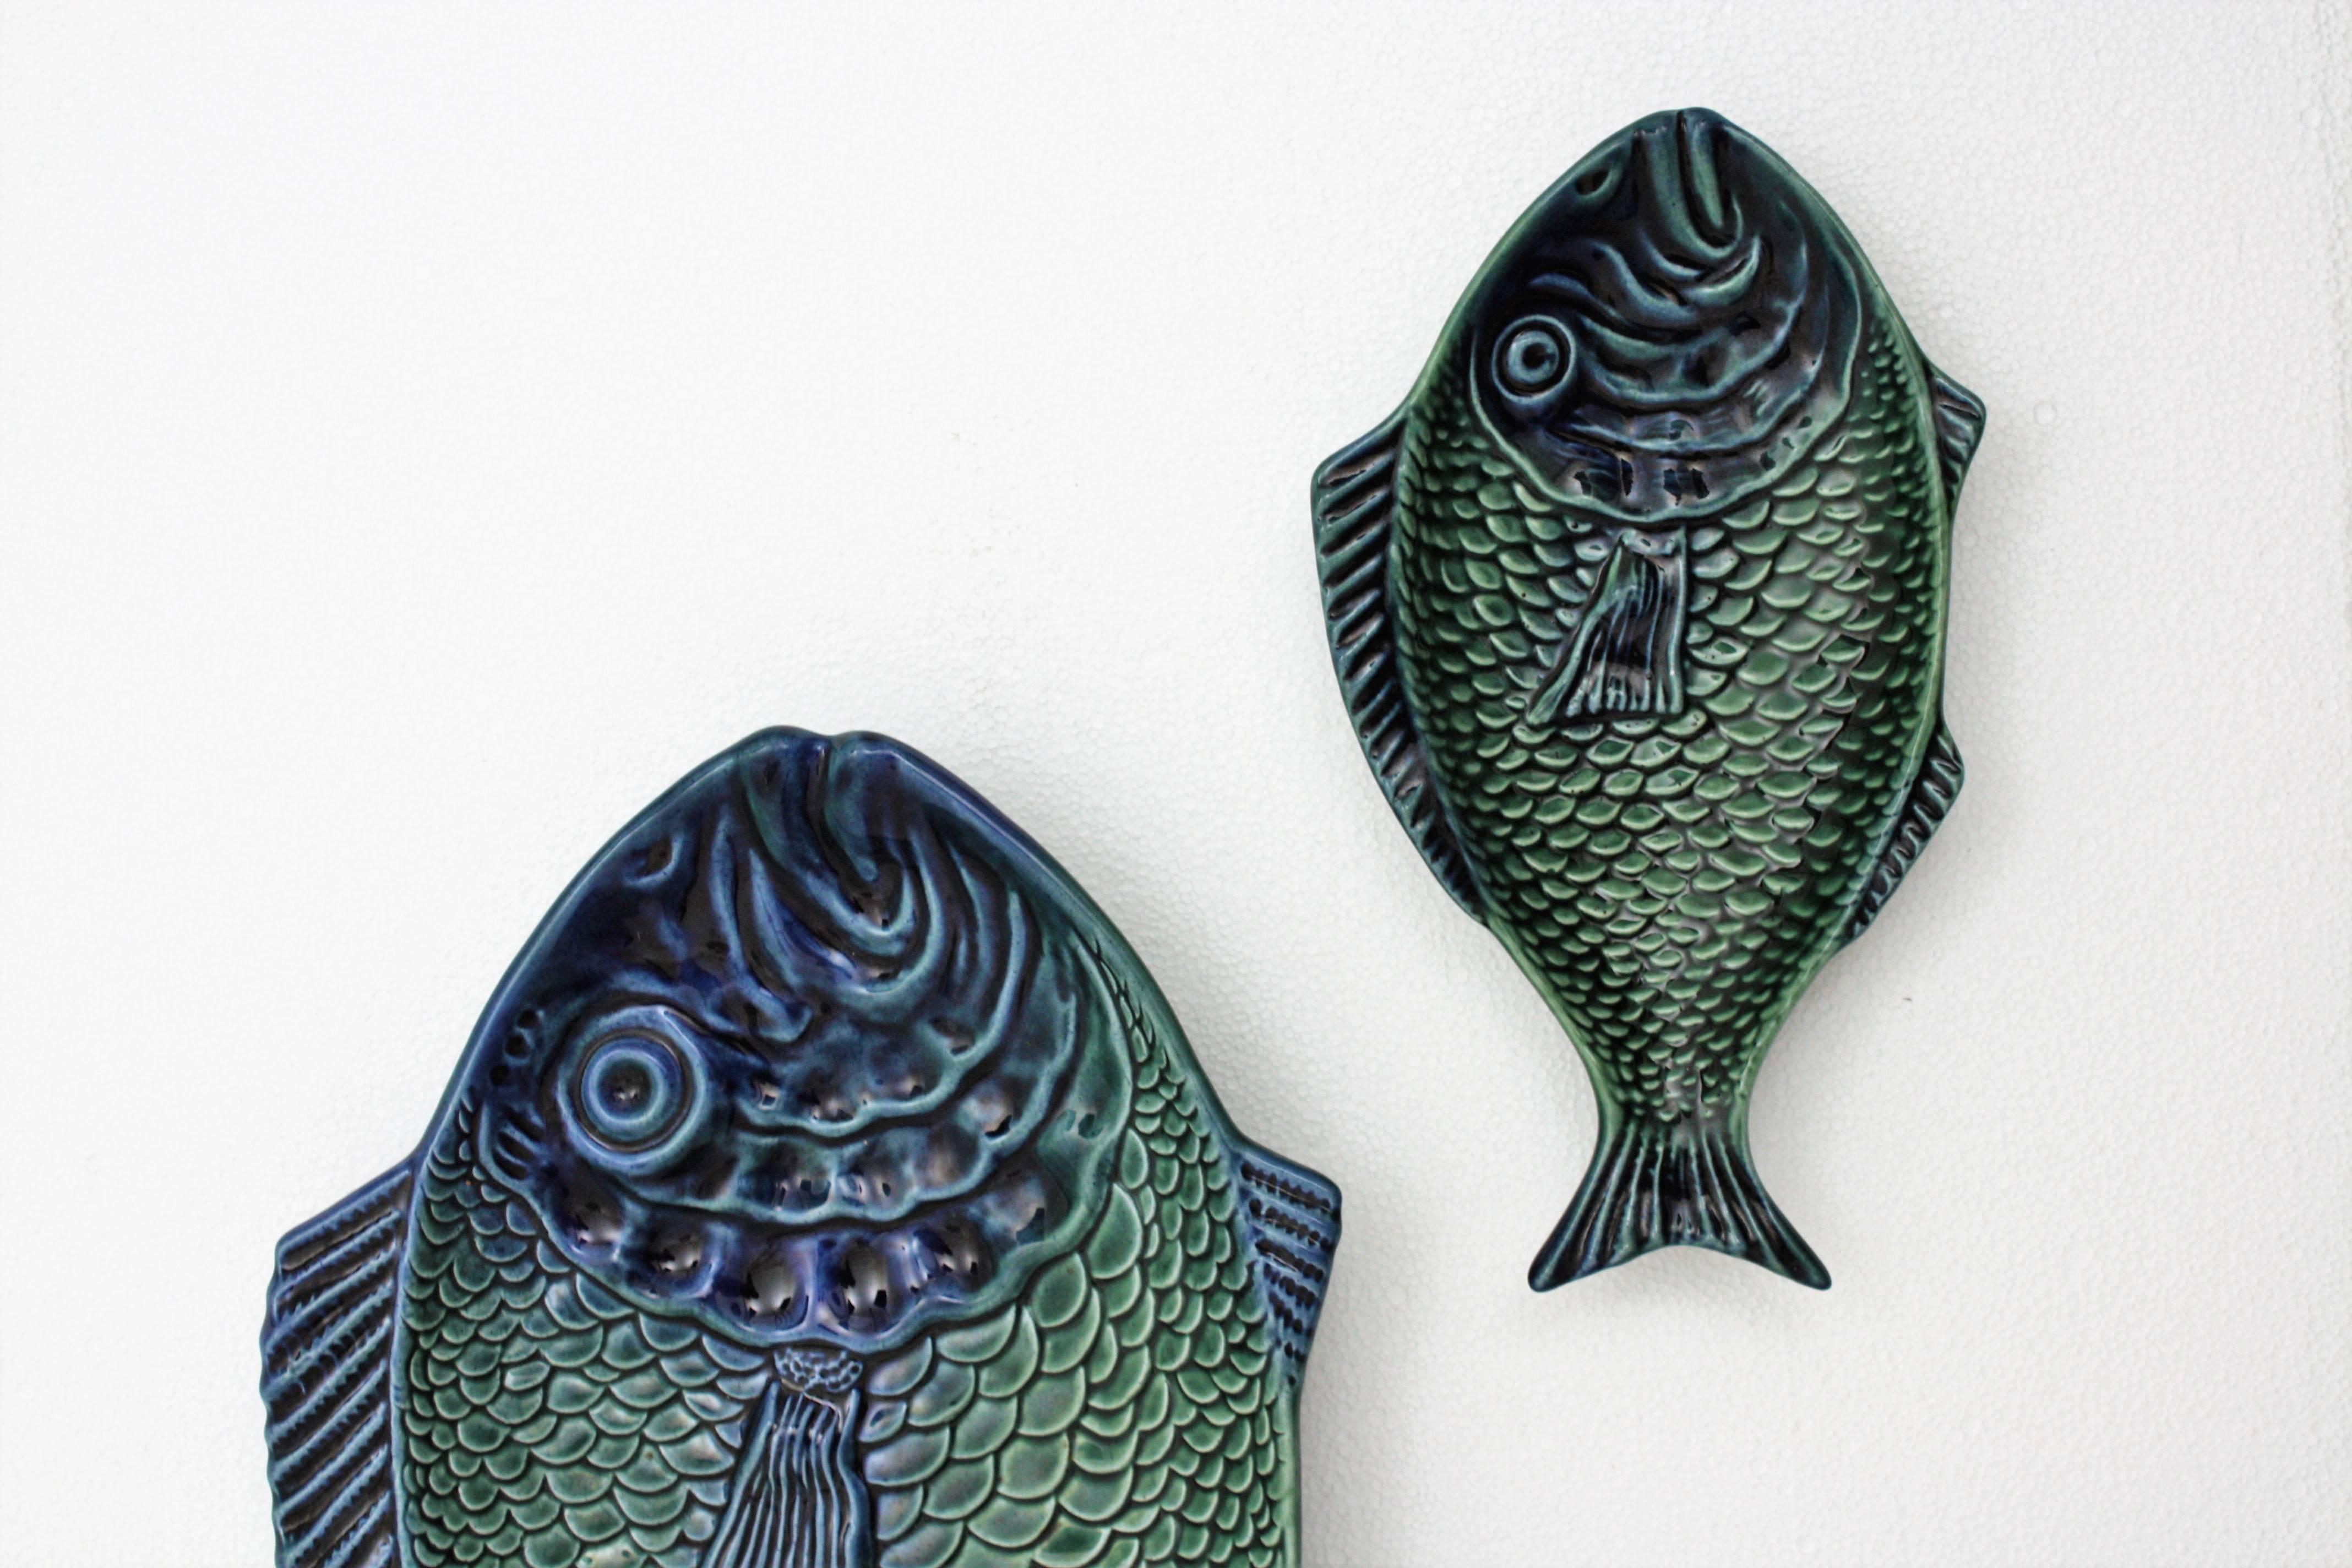 Mid-Century Modern Pair of Blue and Green Majolica Glazed Ceramic Fish Platters, Portugal, 1960s